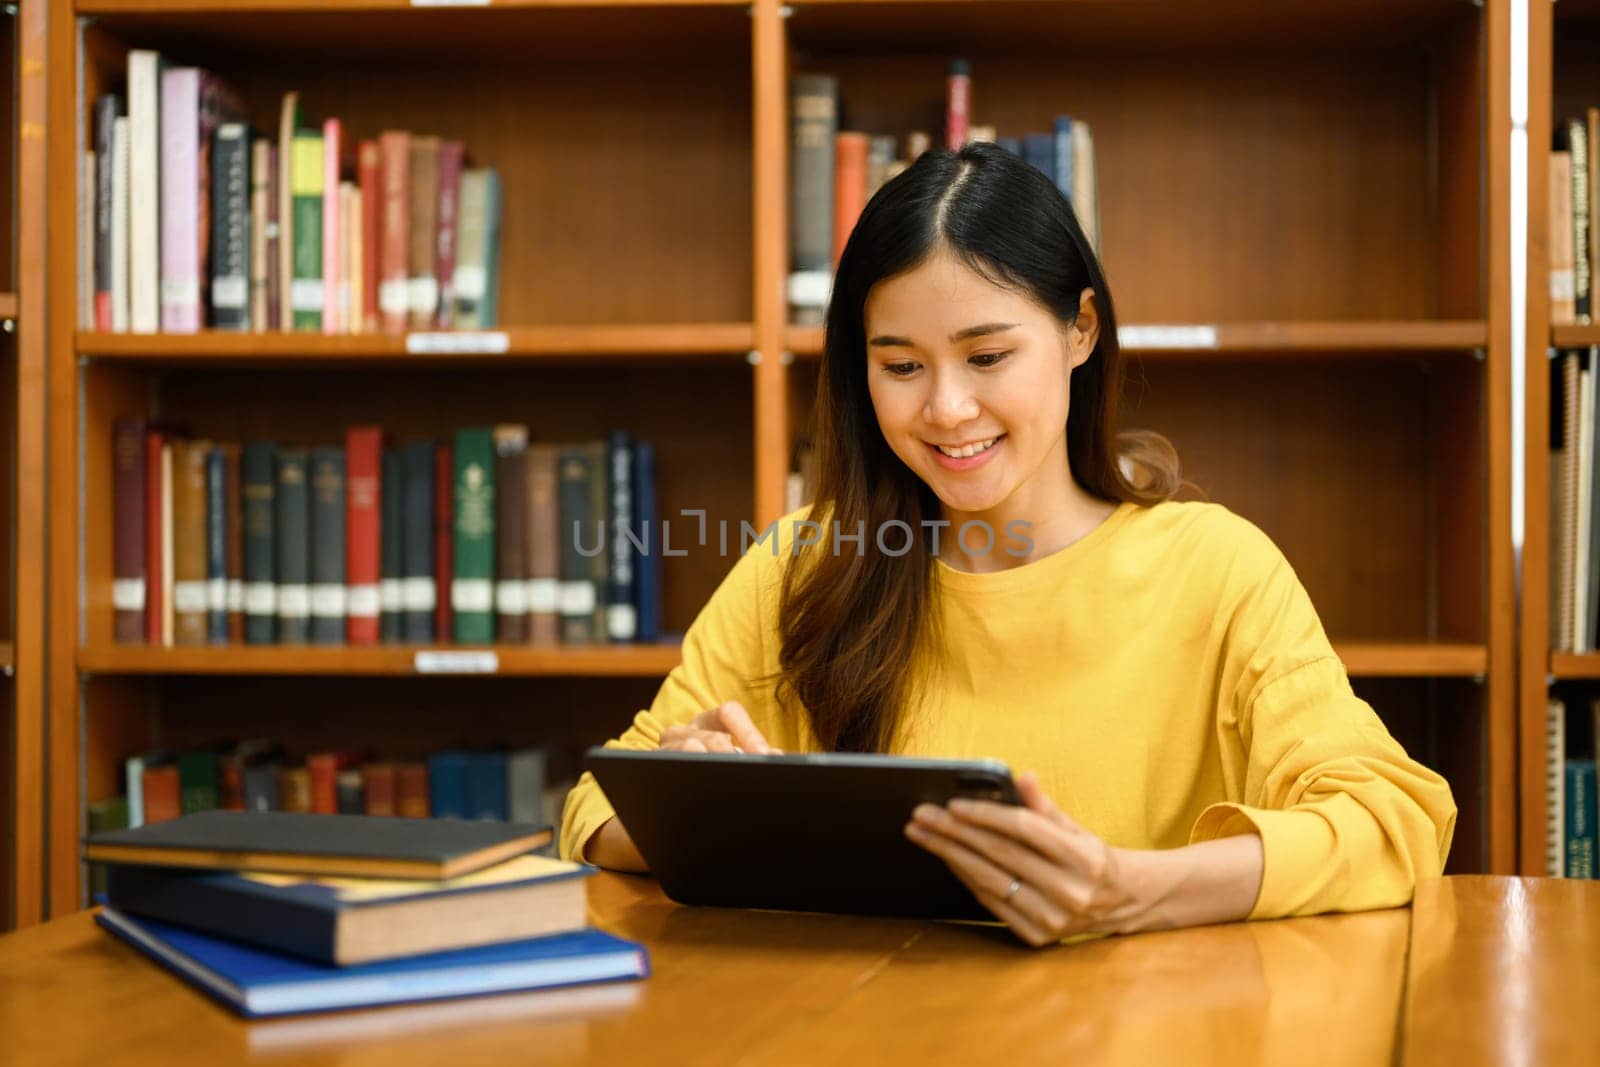 Interested asian female student using digital tablet, doing class assignment in library. Education, learning and people concept.